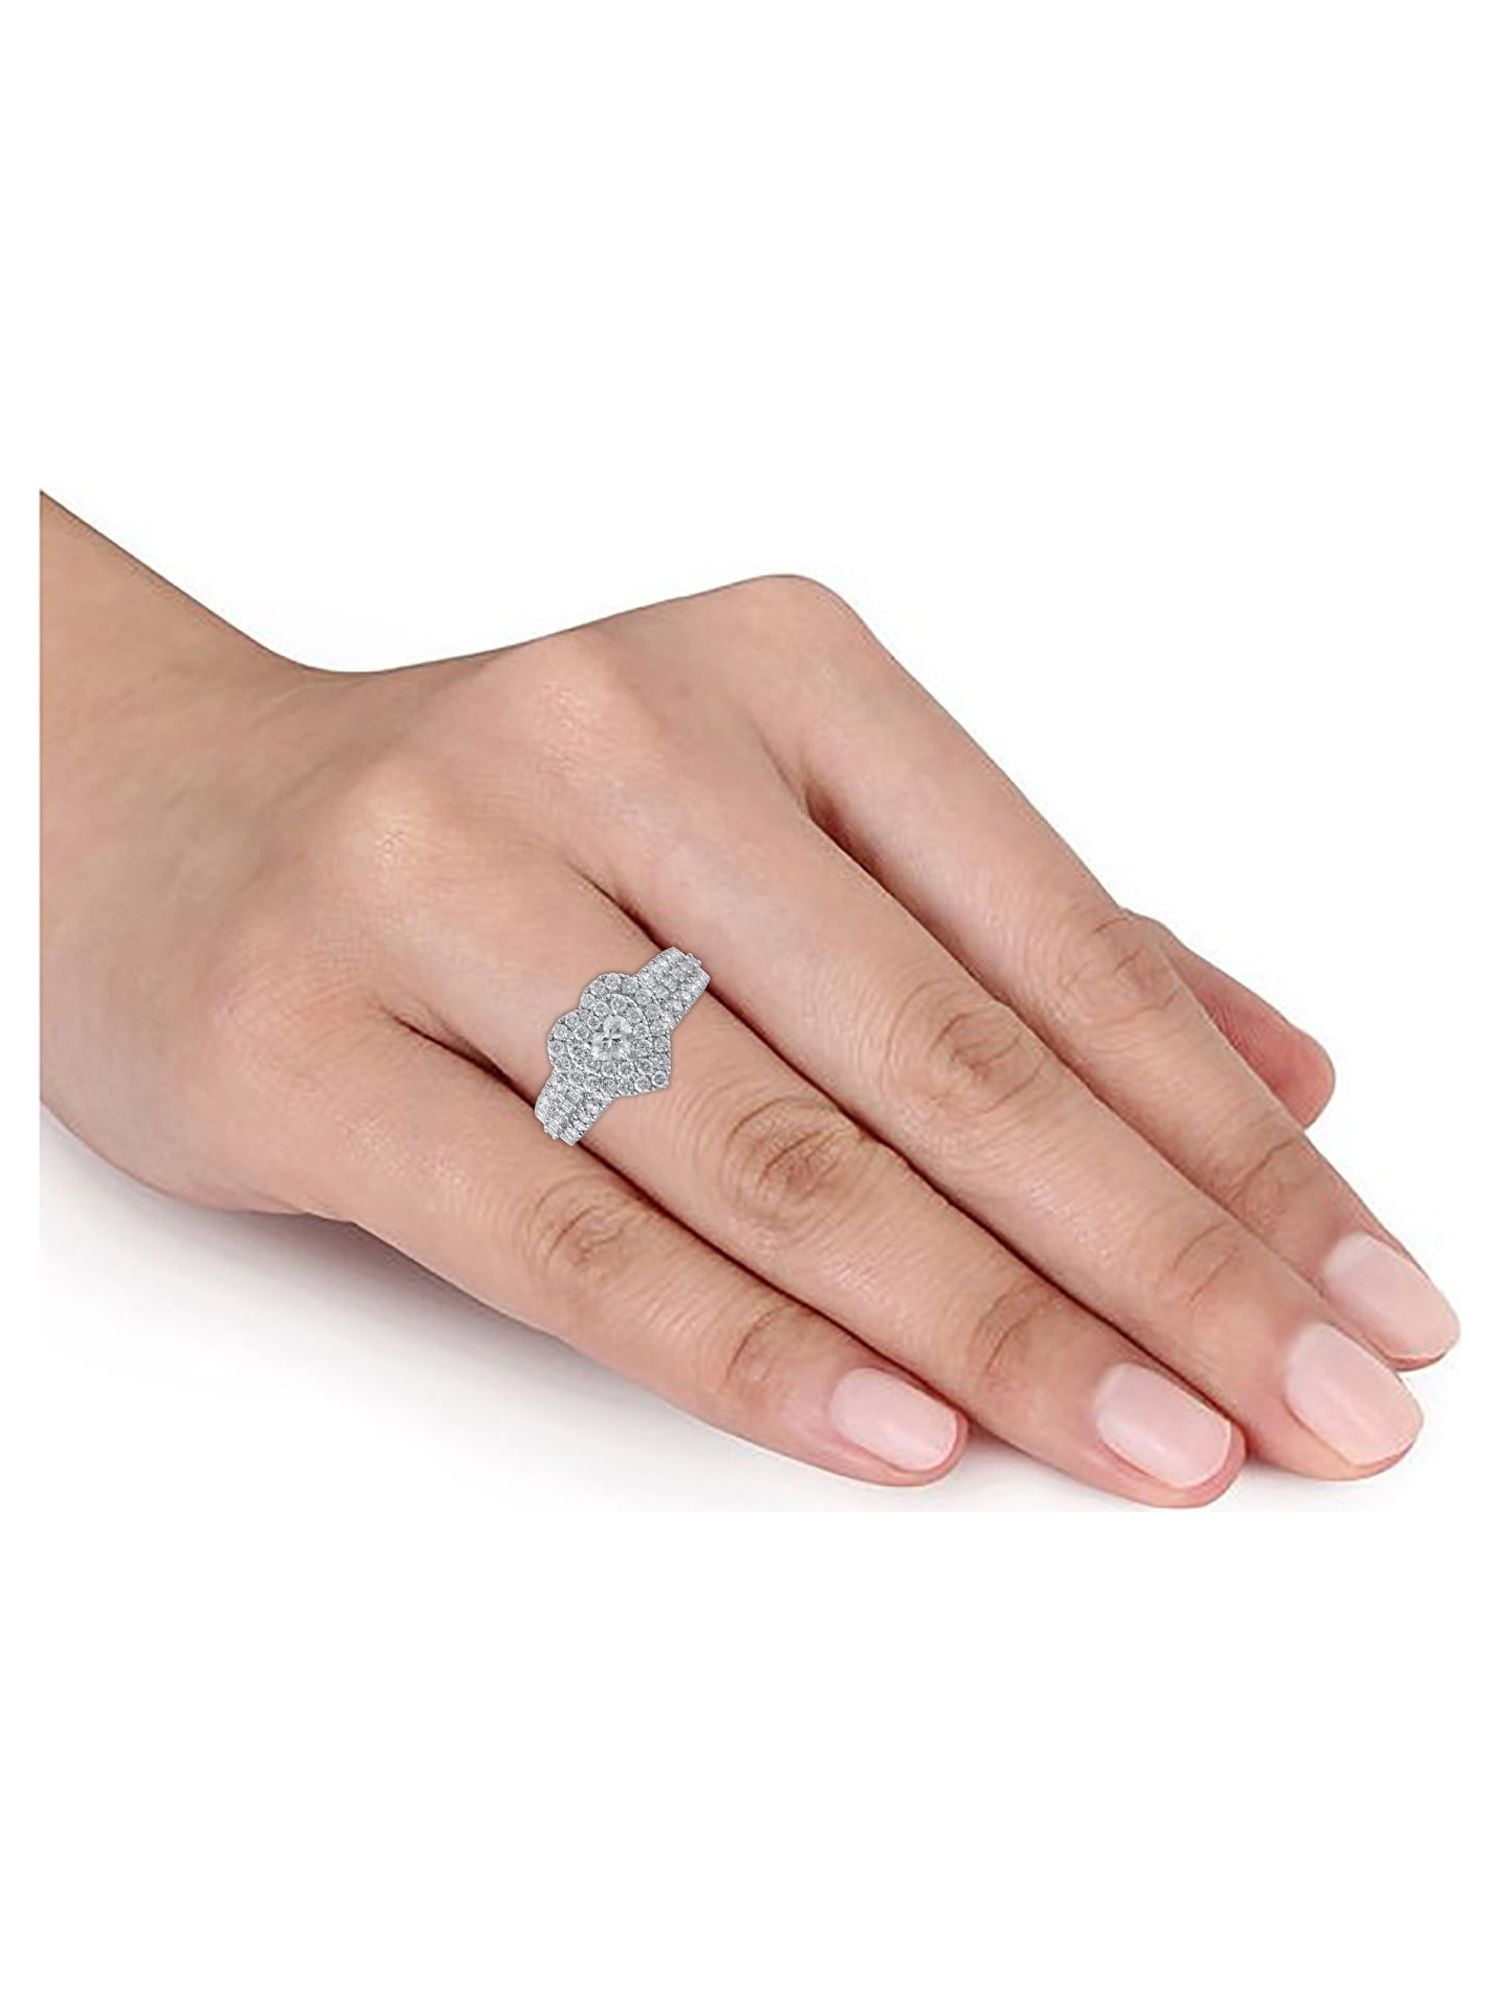 Aura heart-shaped diamond ring in platinum | De Beers AT